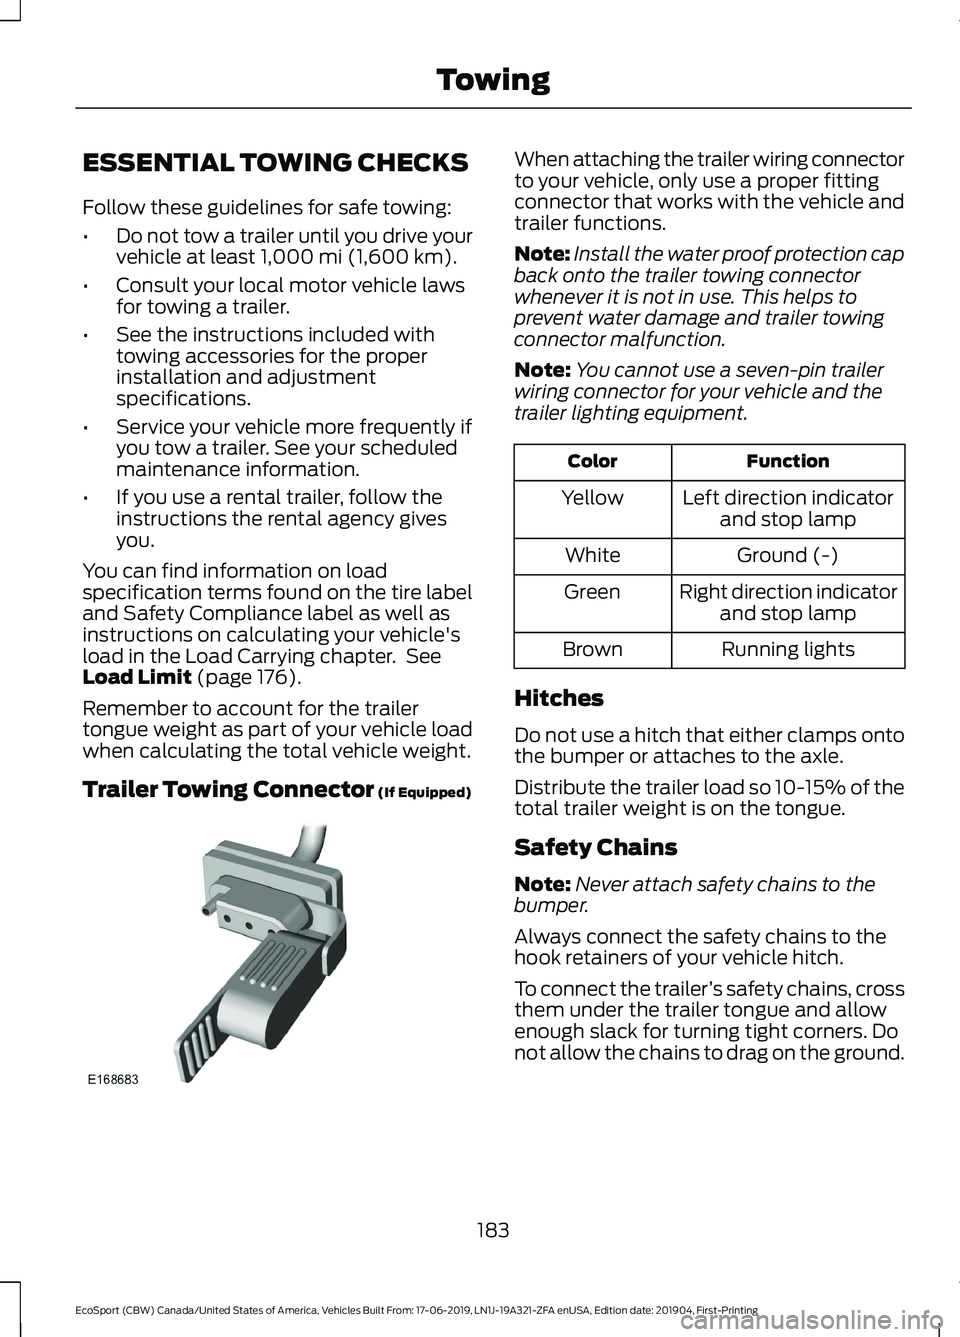 FORD ECOSPORT 2020  Owners Manual ESSENTIAL TOWING CHECKS
Follow these guidelines for safe towing:
•Do not tow a trailer until you drive yourvehicle at least 1,000 mi (1,600 km).
•Consult your local motor vehicle lawsfor towing a 